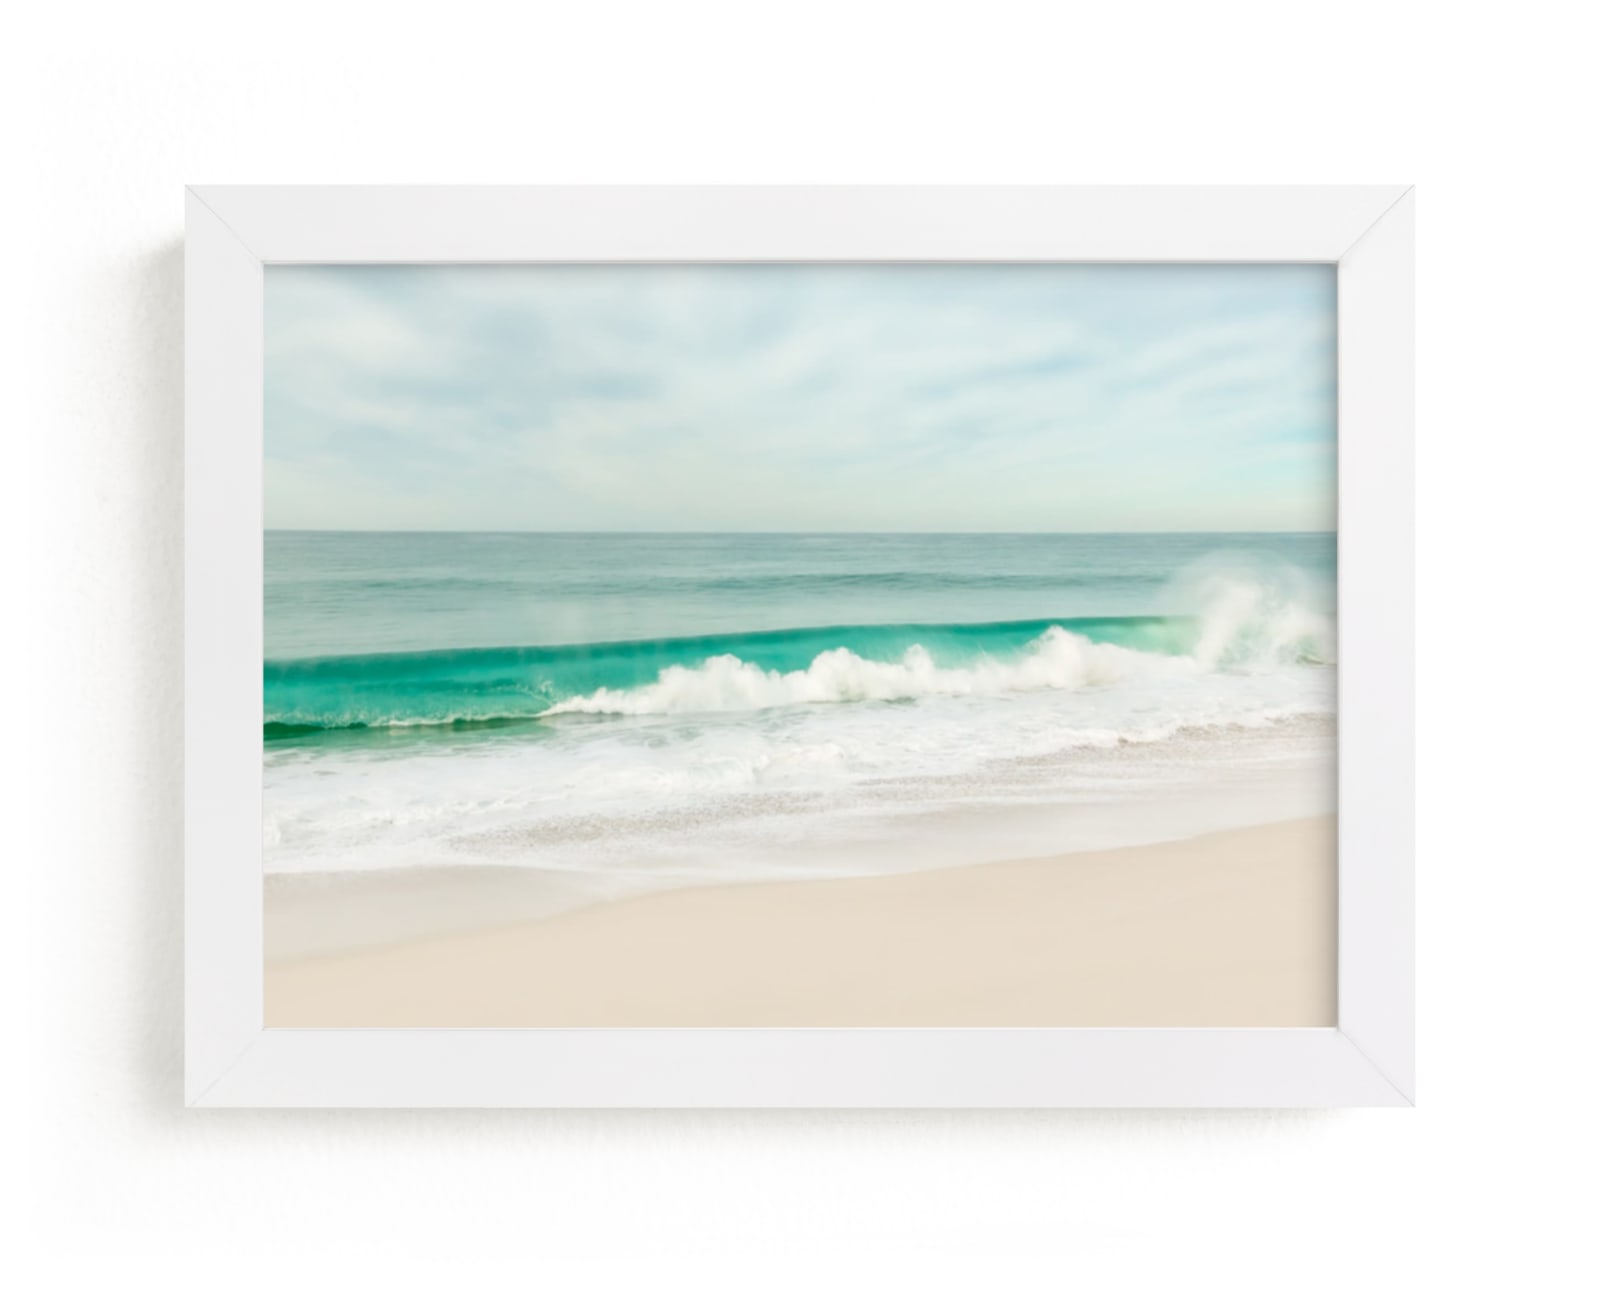 Natures Perfection Wall Art Prints by Debra Butler | Minted